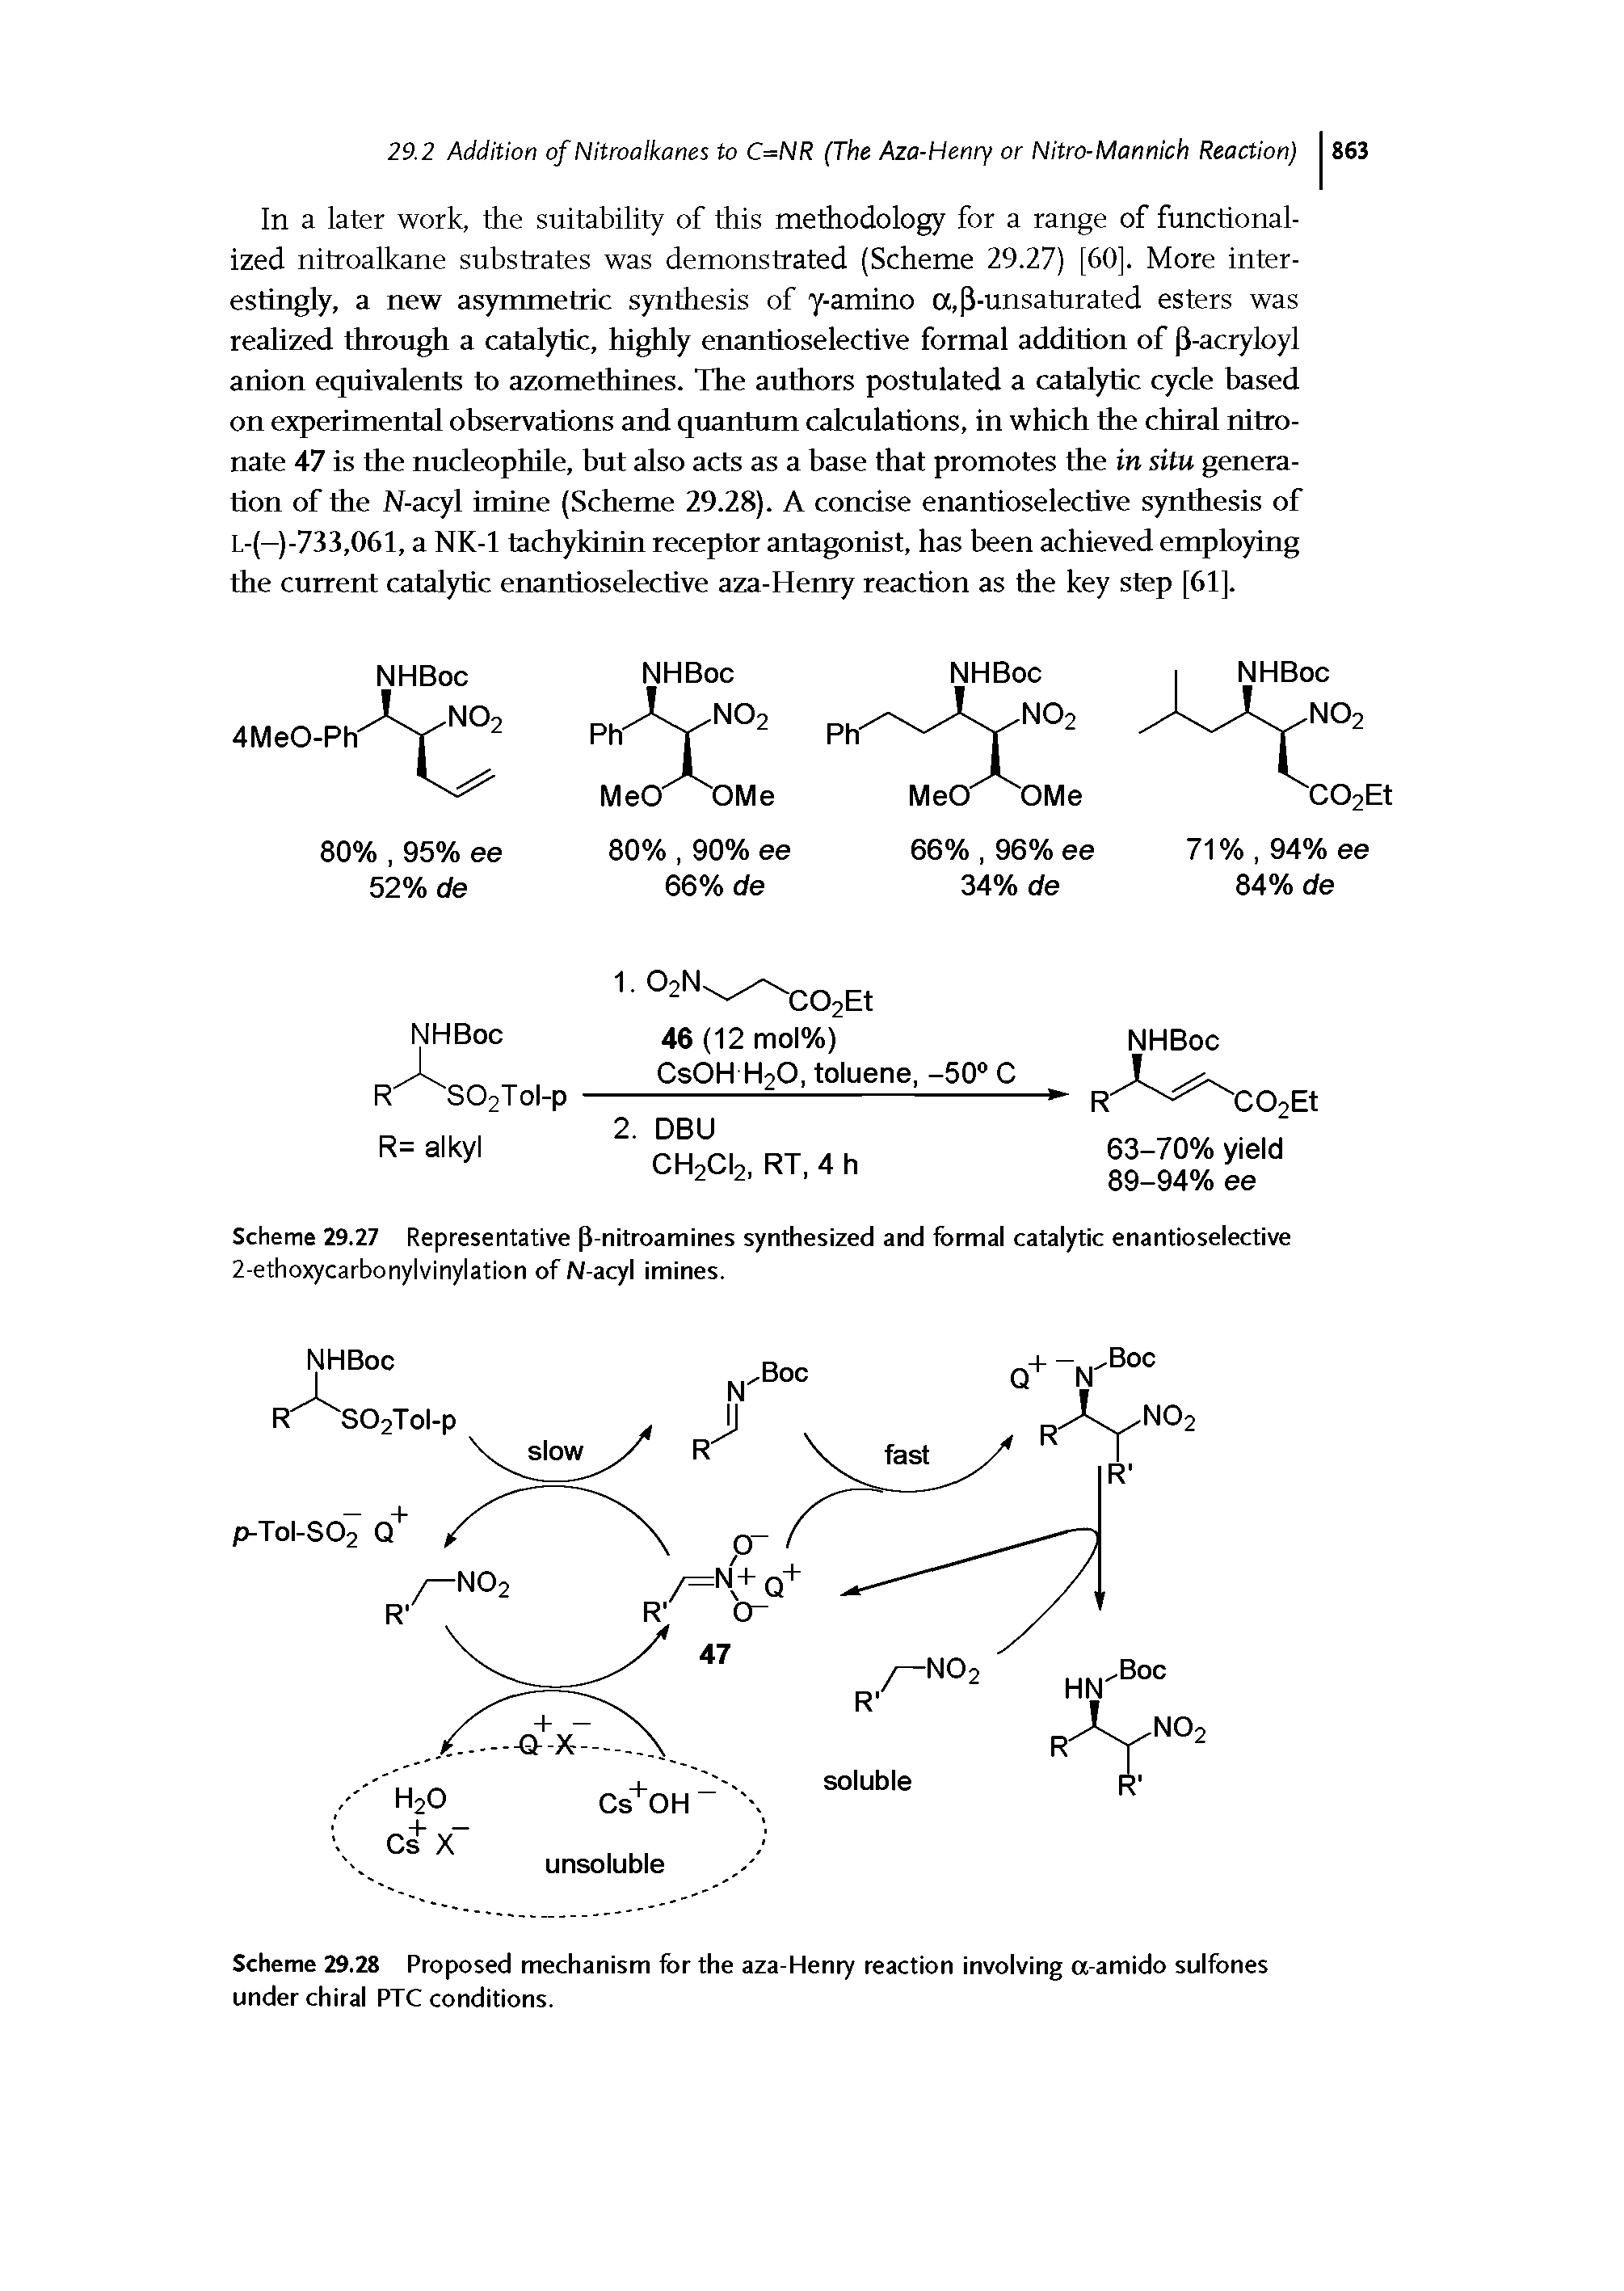 Scheme 29.28 Proposed mechanism for the aza-Henry reaction involving a-amido sulfones under chiral PTC conditions.